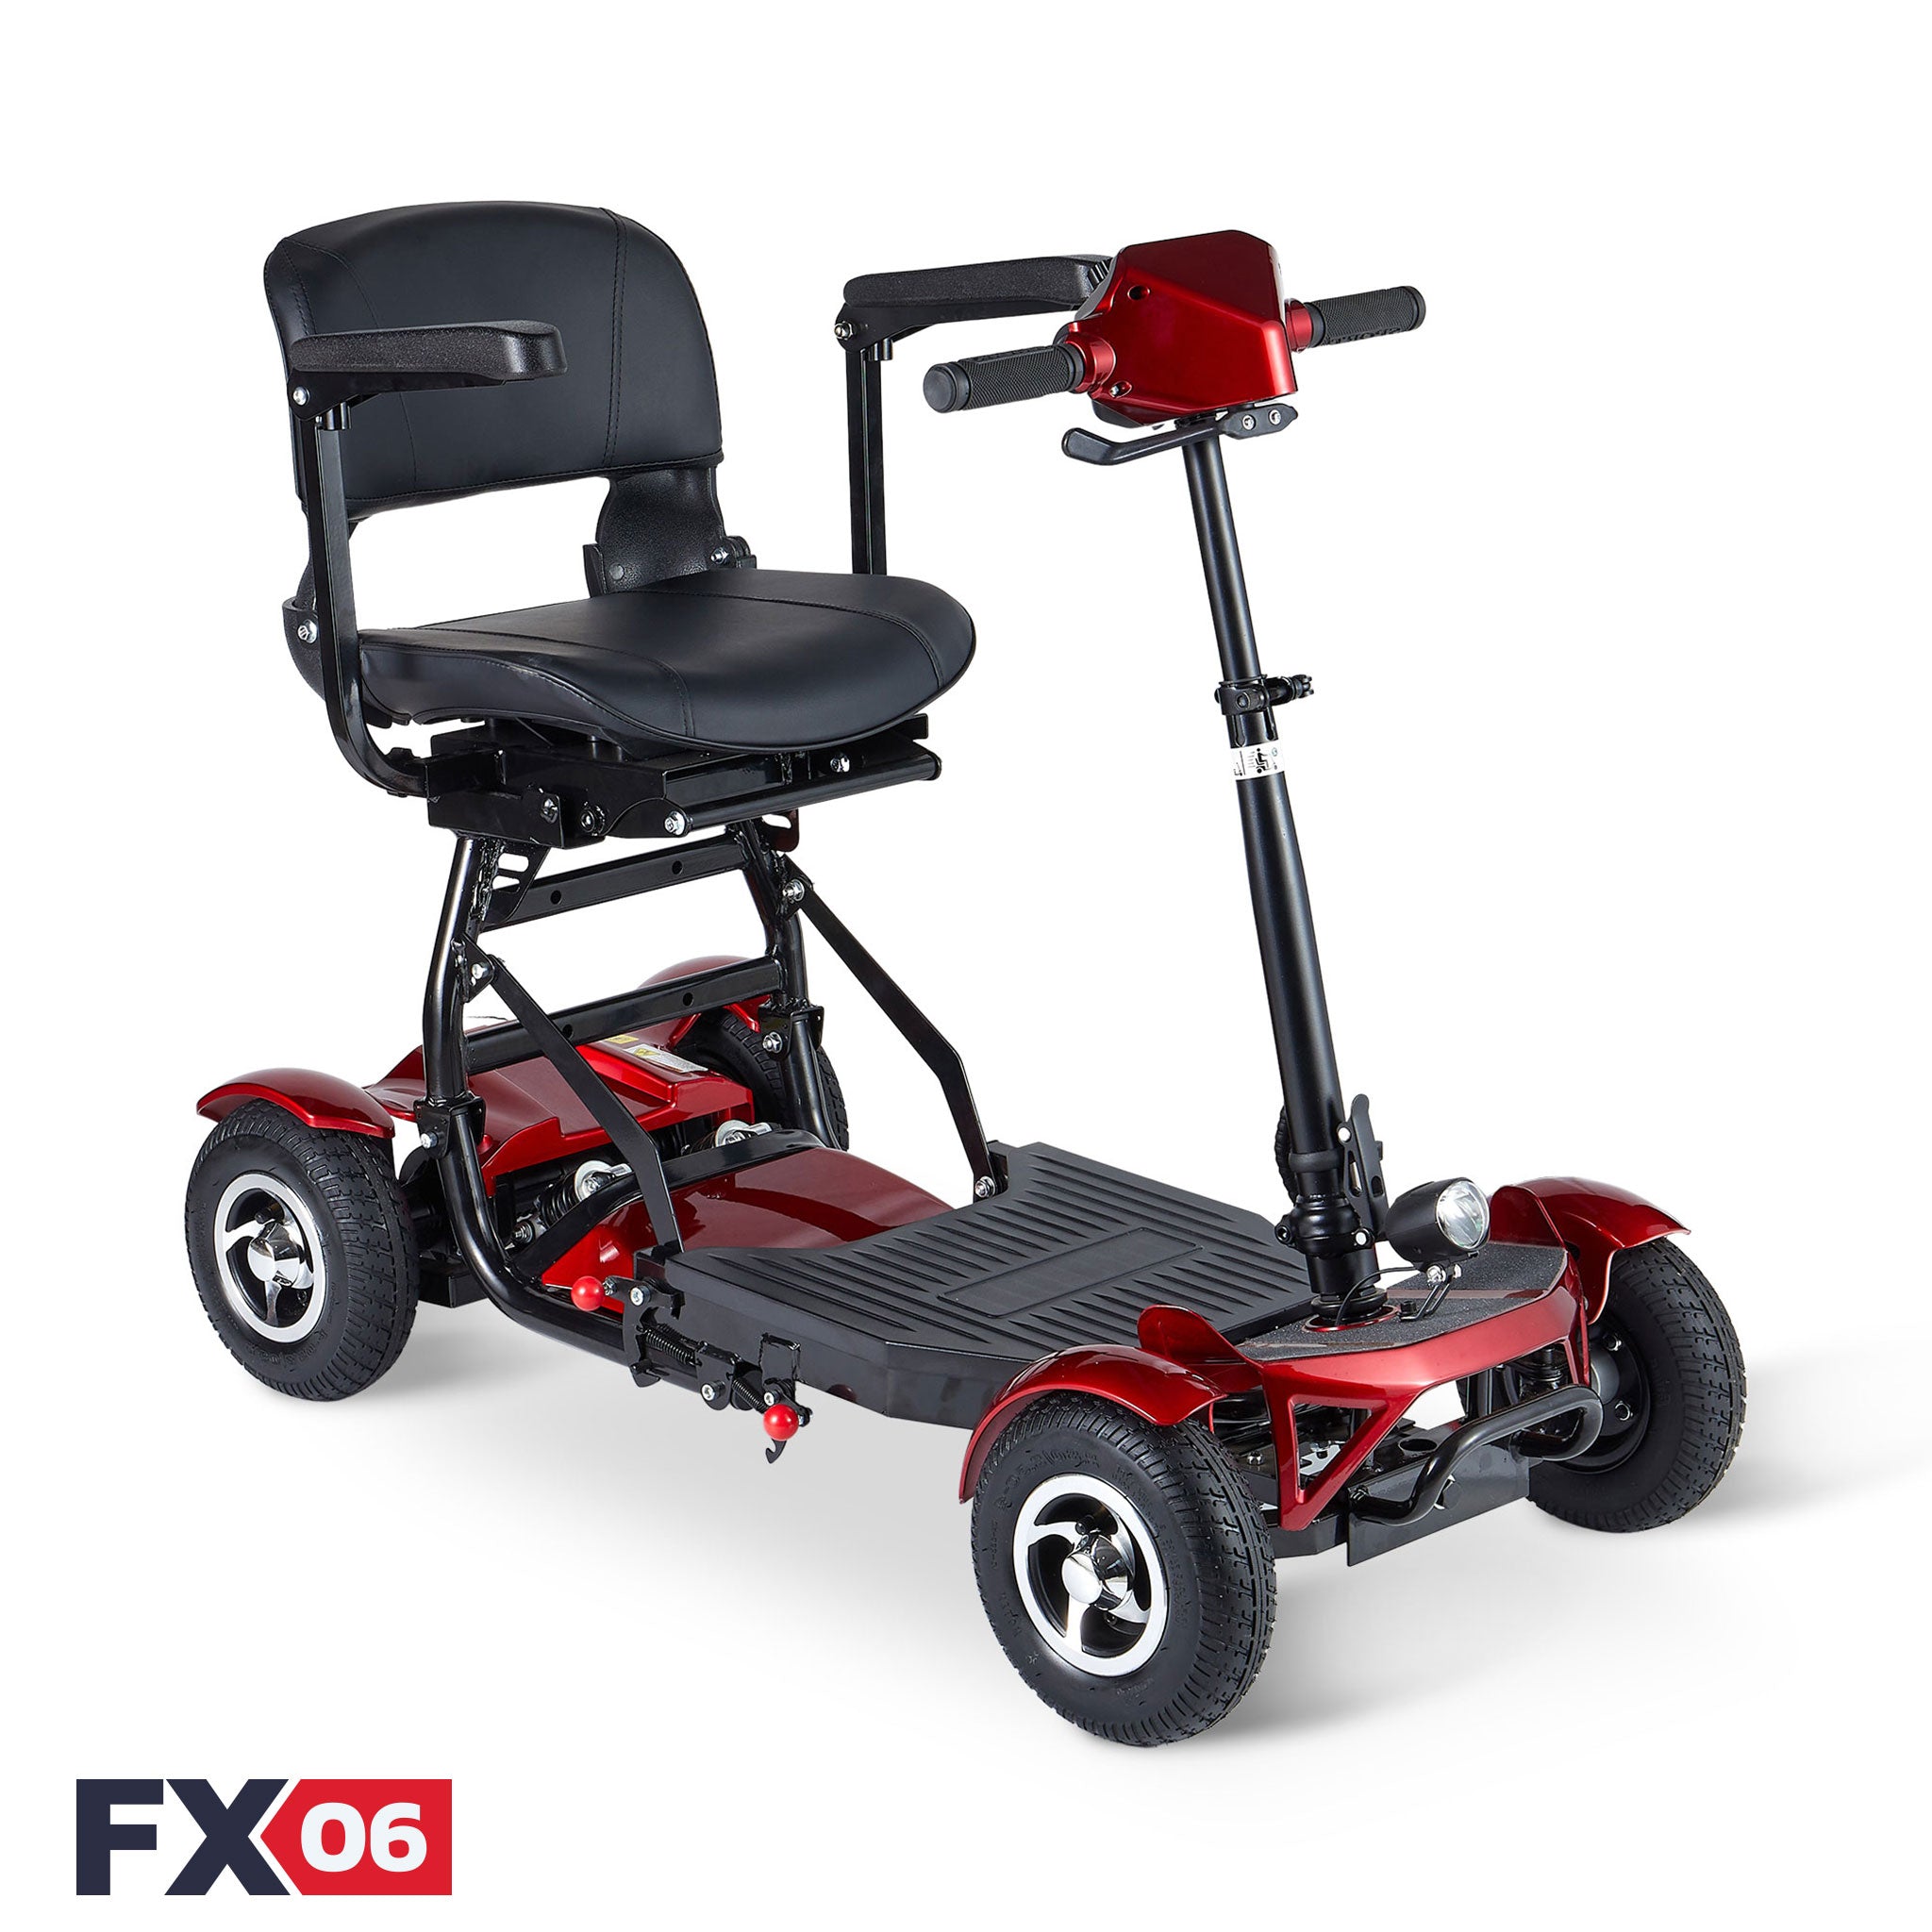 Foldable 4 Wheel Mobility Scooter for Seniors - 300 Lbs Weight